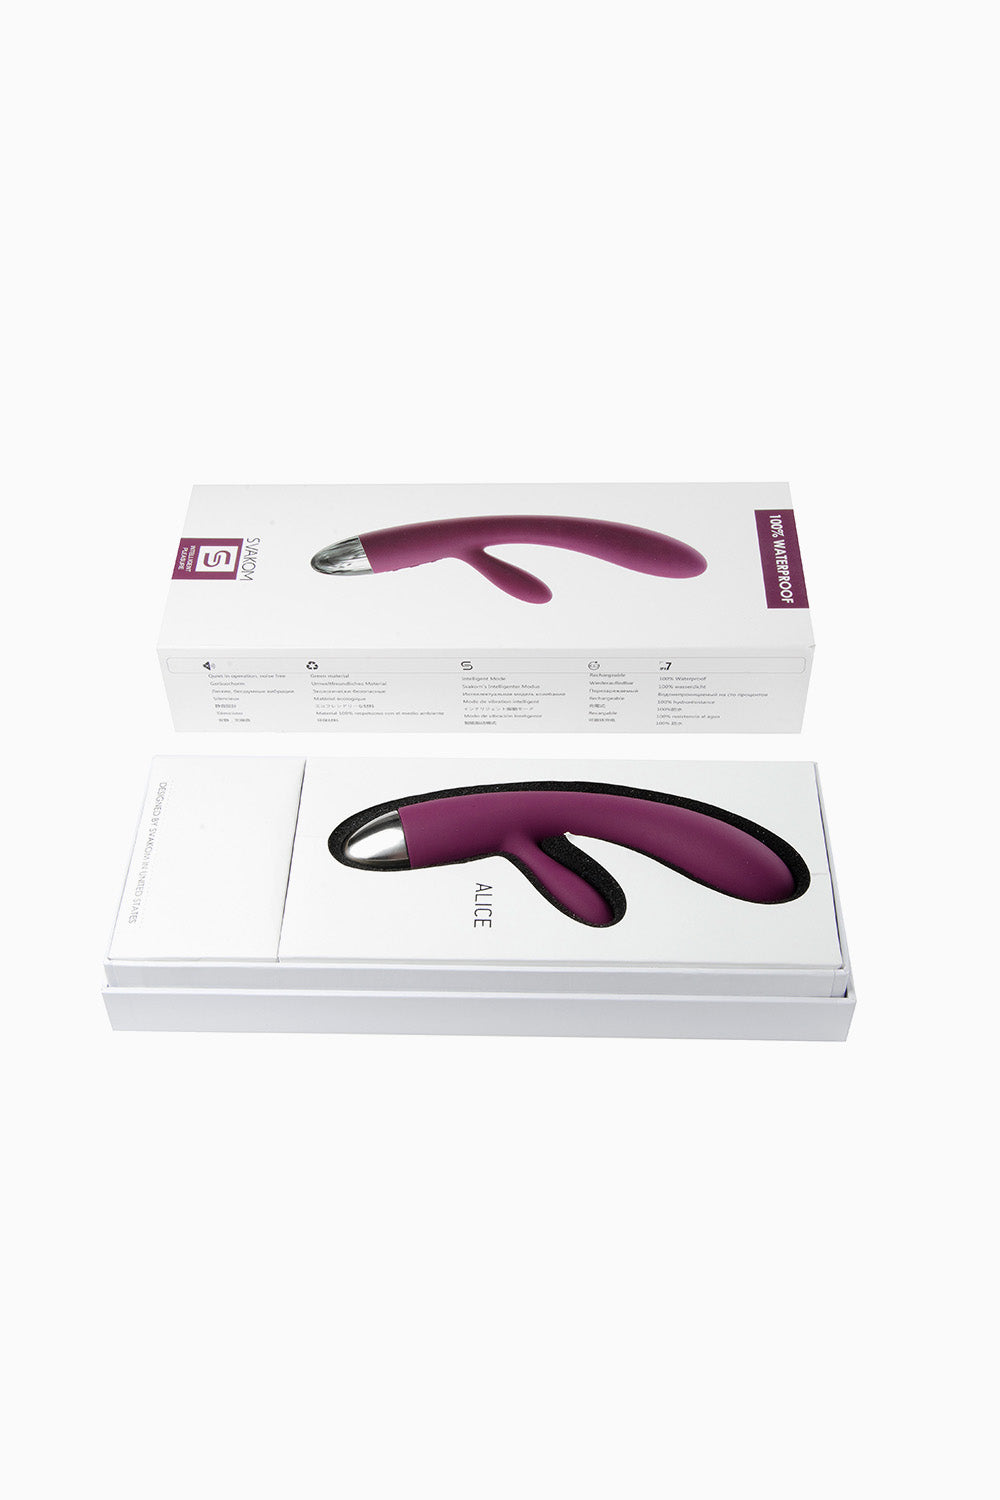 Svakom Alice Rabbit Rechargeable Vibrator Violet, 6.5 Inches